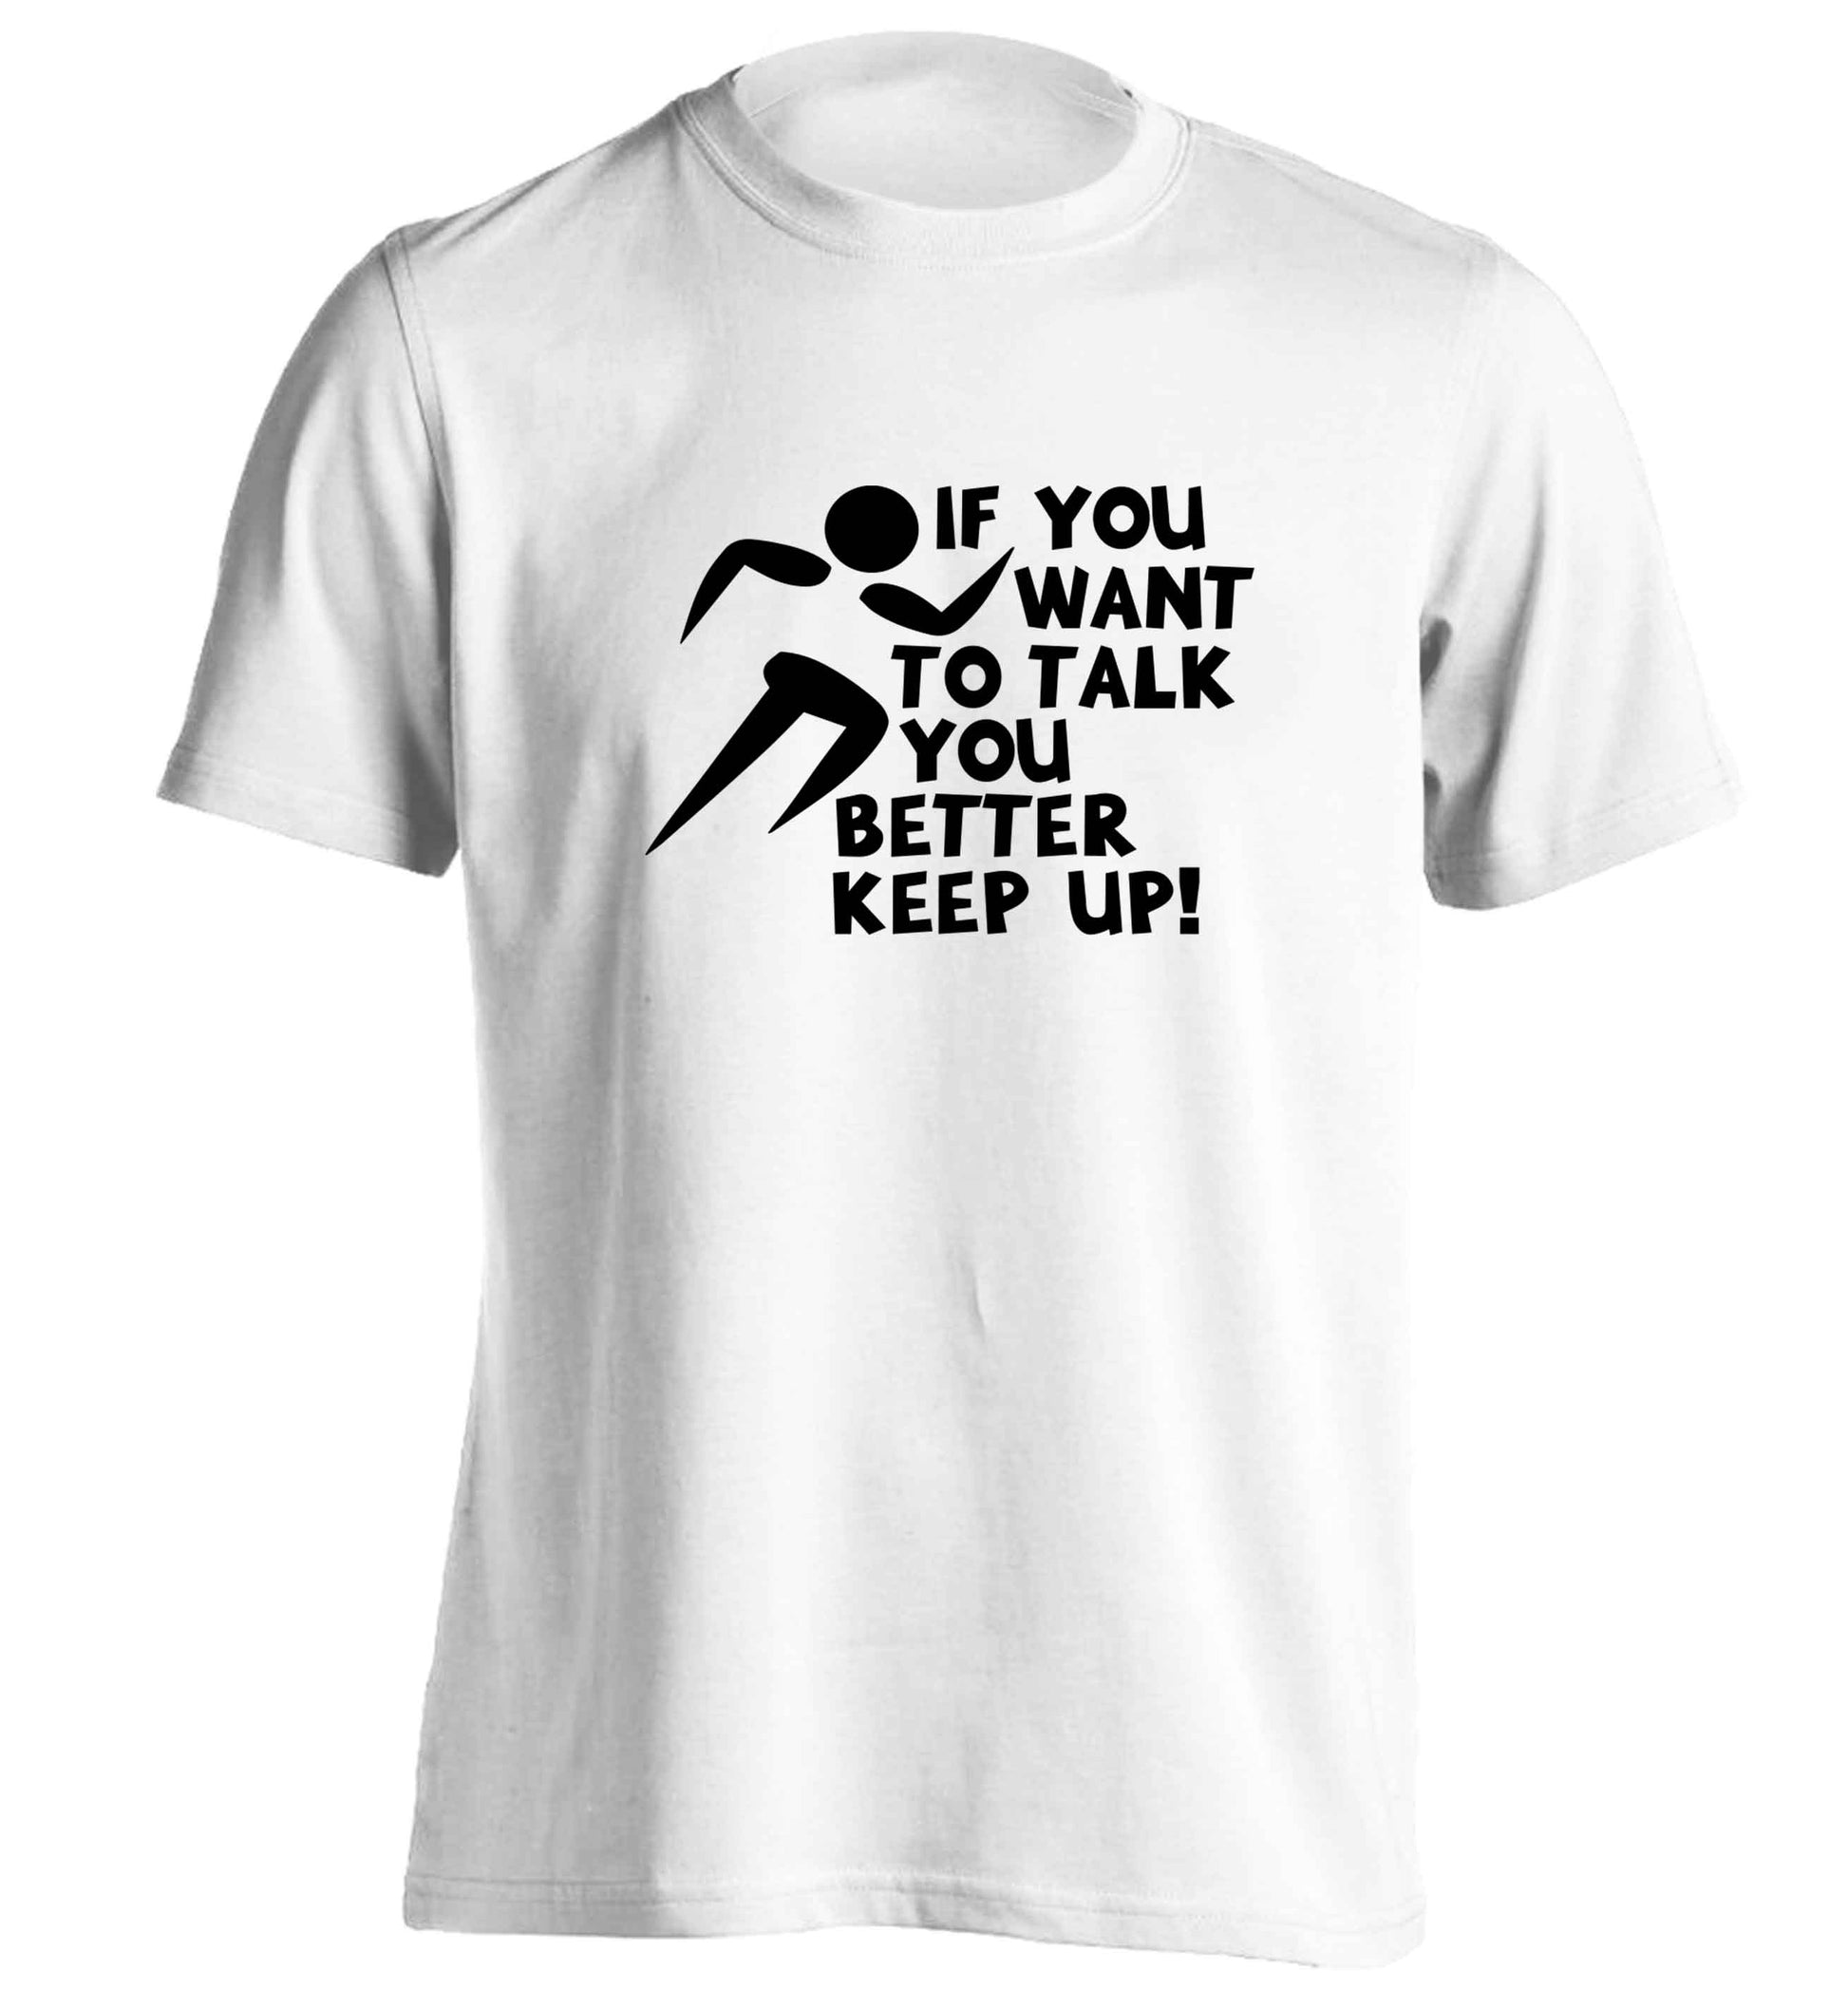 If you want to talk you better keep up! adults unisex white Tshirt 2XL